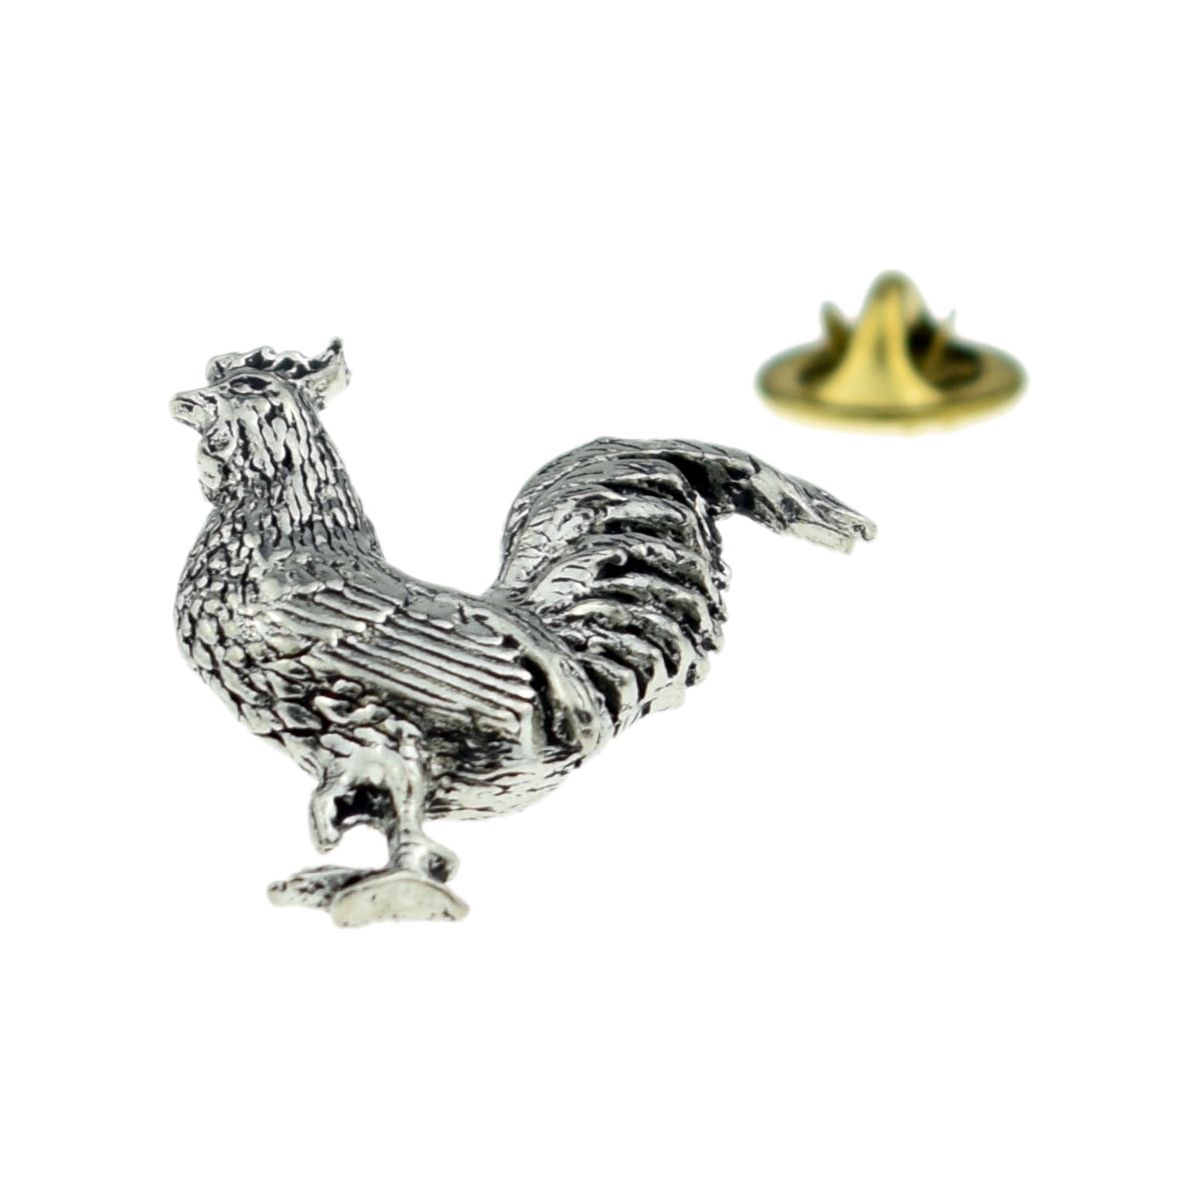 Cockerel Rooster Chicken English Pewter Lapel Pin Badge - Ashton and Finch